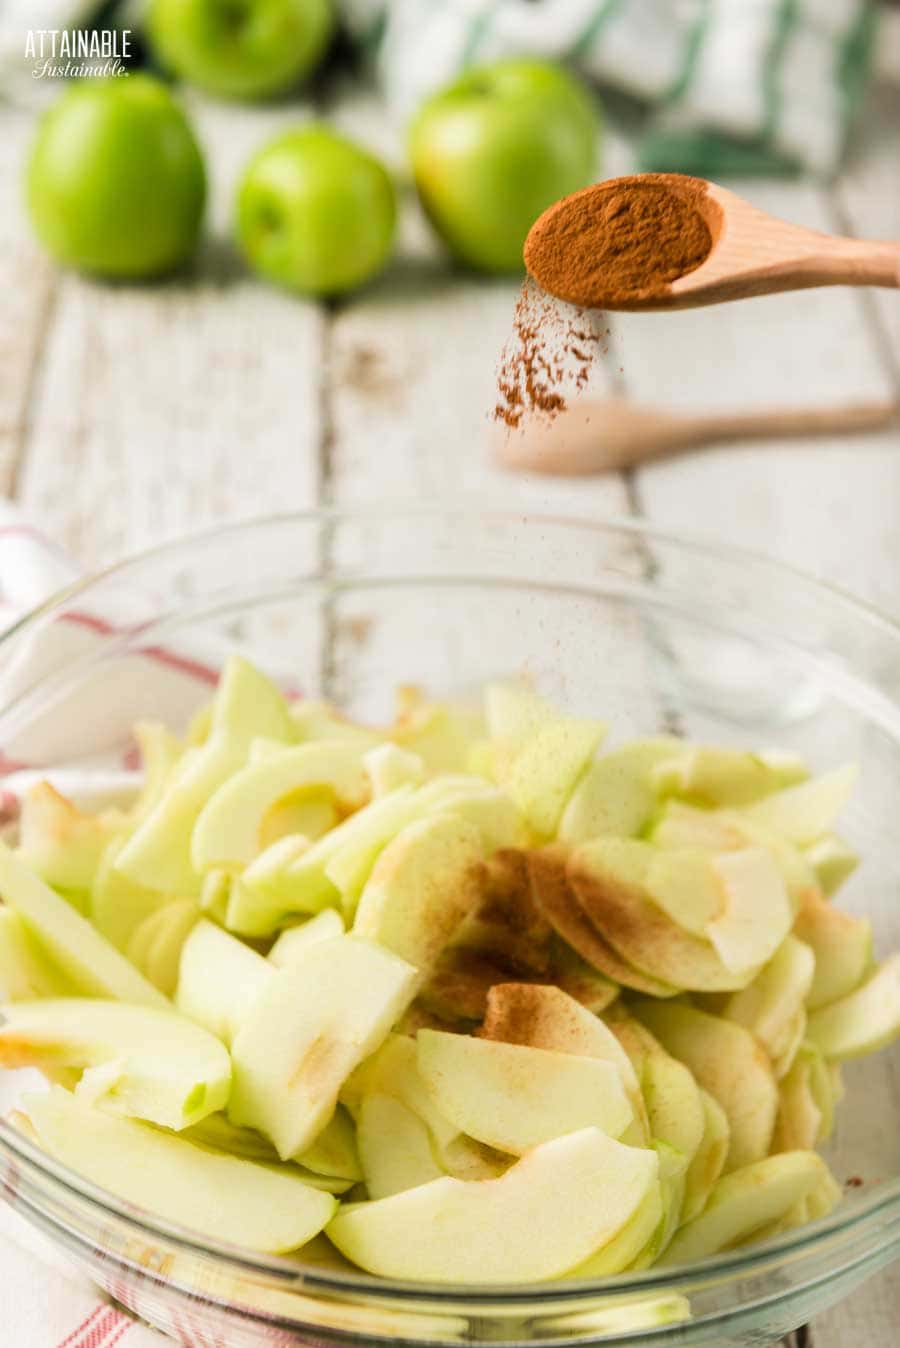 sliced apples in a glass bowl, spoon full of cinnamon being dropped in.